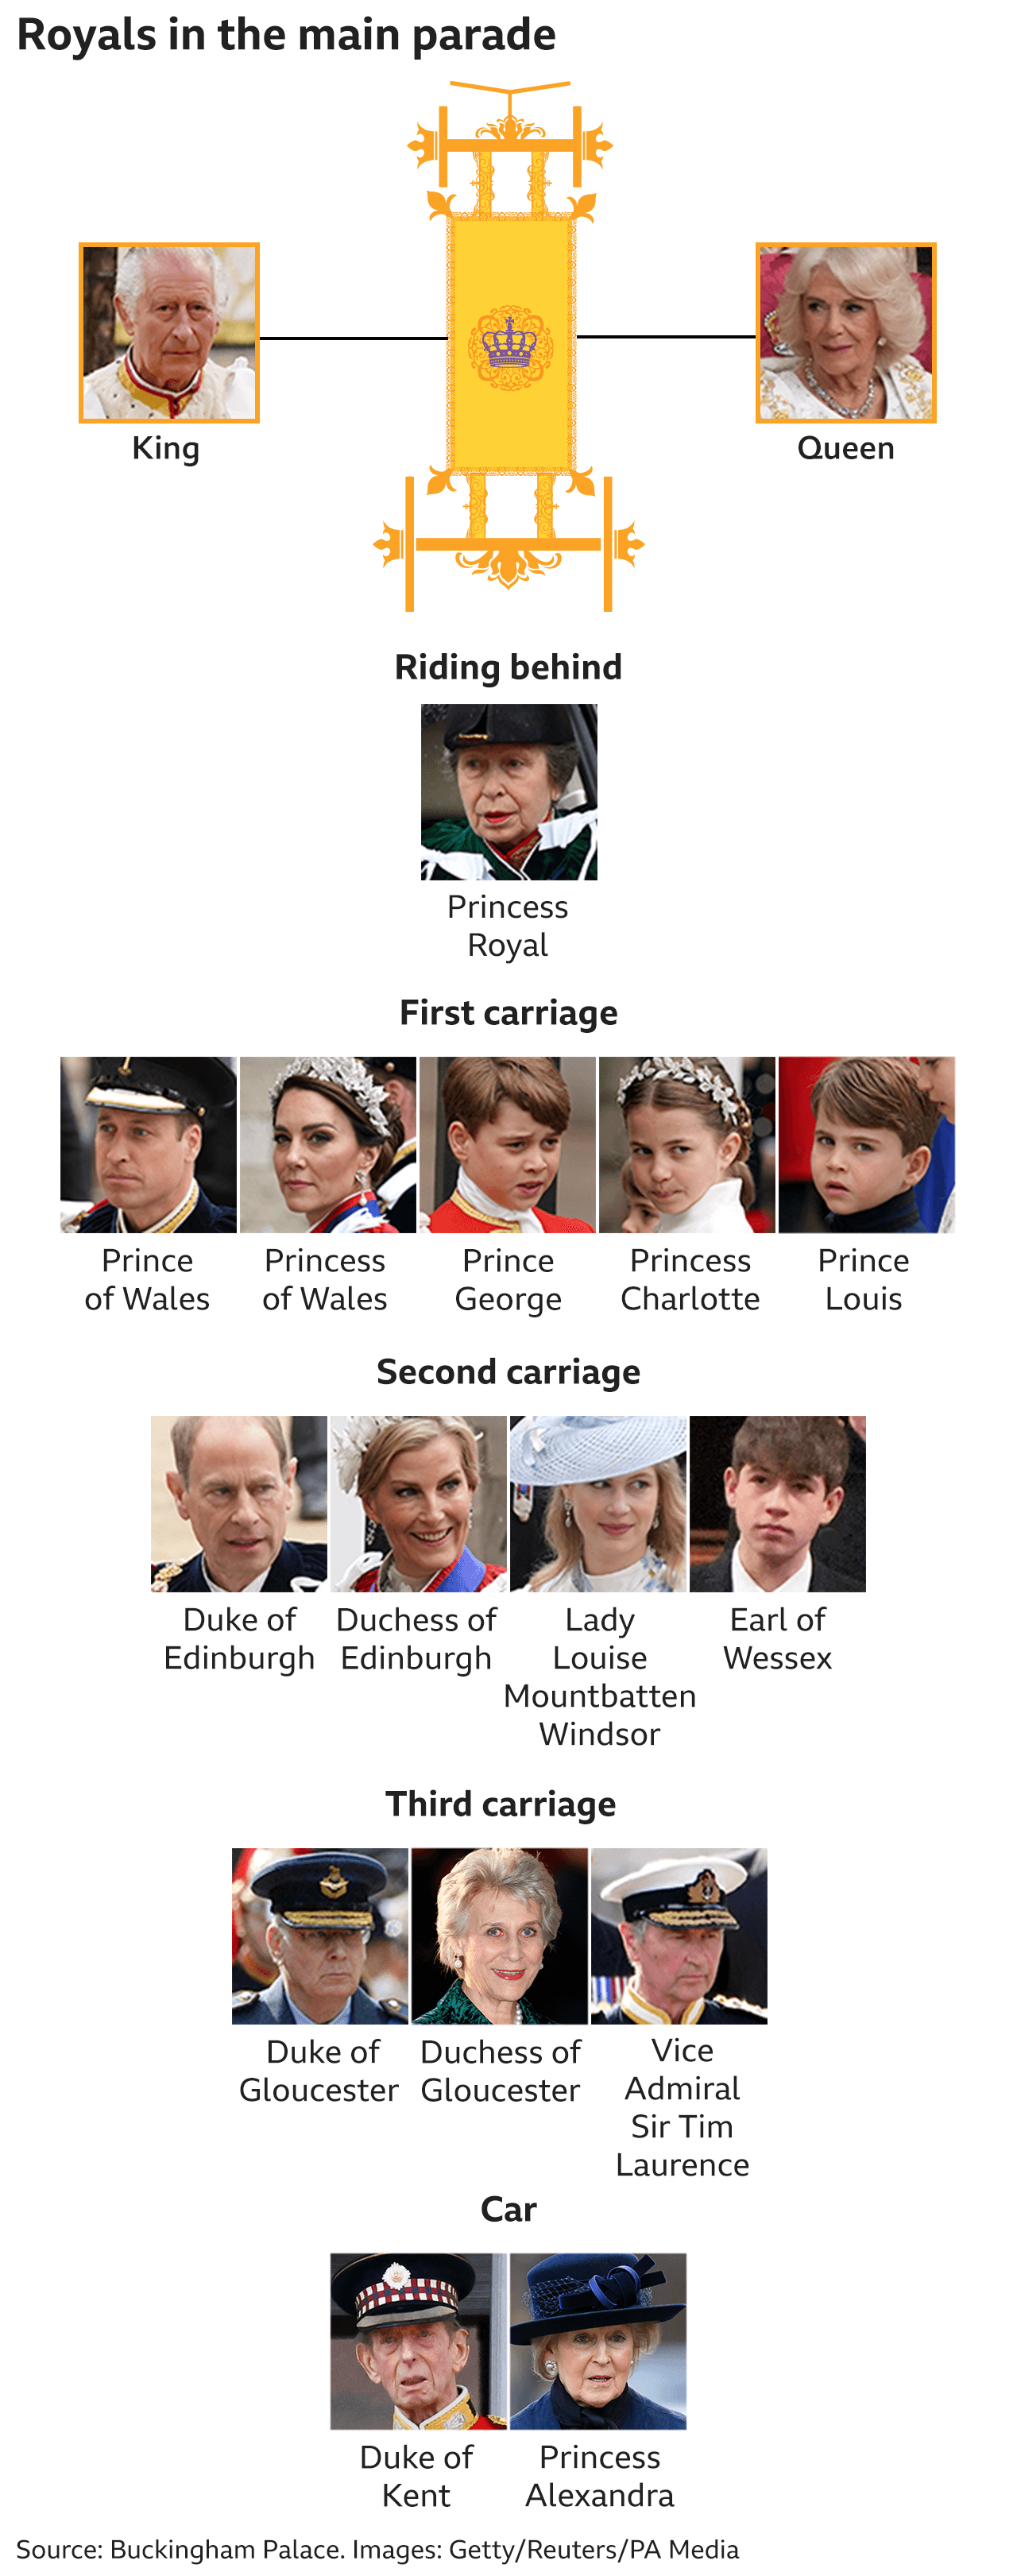 Graphic showing which royals are taking part in the main procession, with the King and Queen Consort in the Gold State Coach, the Princess Royal riding behind them, the Prince and Princess of Wales and their three children in the first carriage, the Duke and Duchess of Edinburgh and their two children in the second carriage, the Duke and Duchess of Gloucester with Vice Admiral Sir Tim Laurence in the third carriage and the Duke of Kent and Princess Alexandra in a car behind them